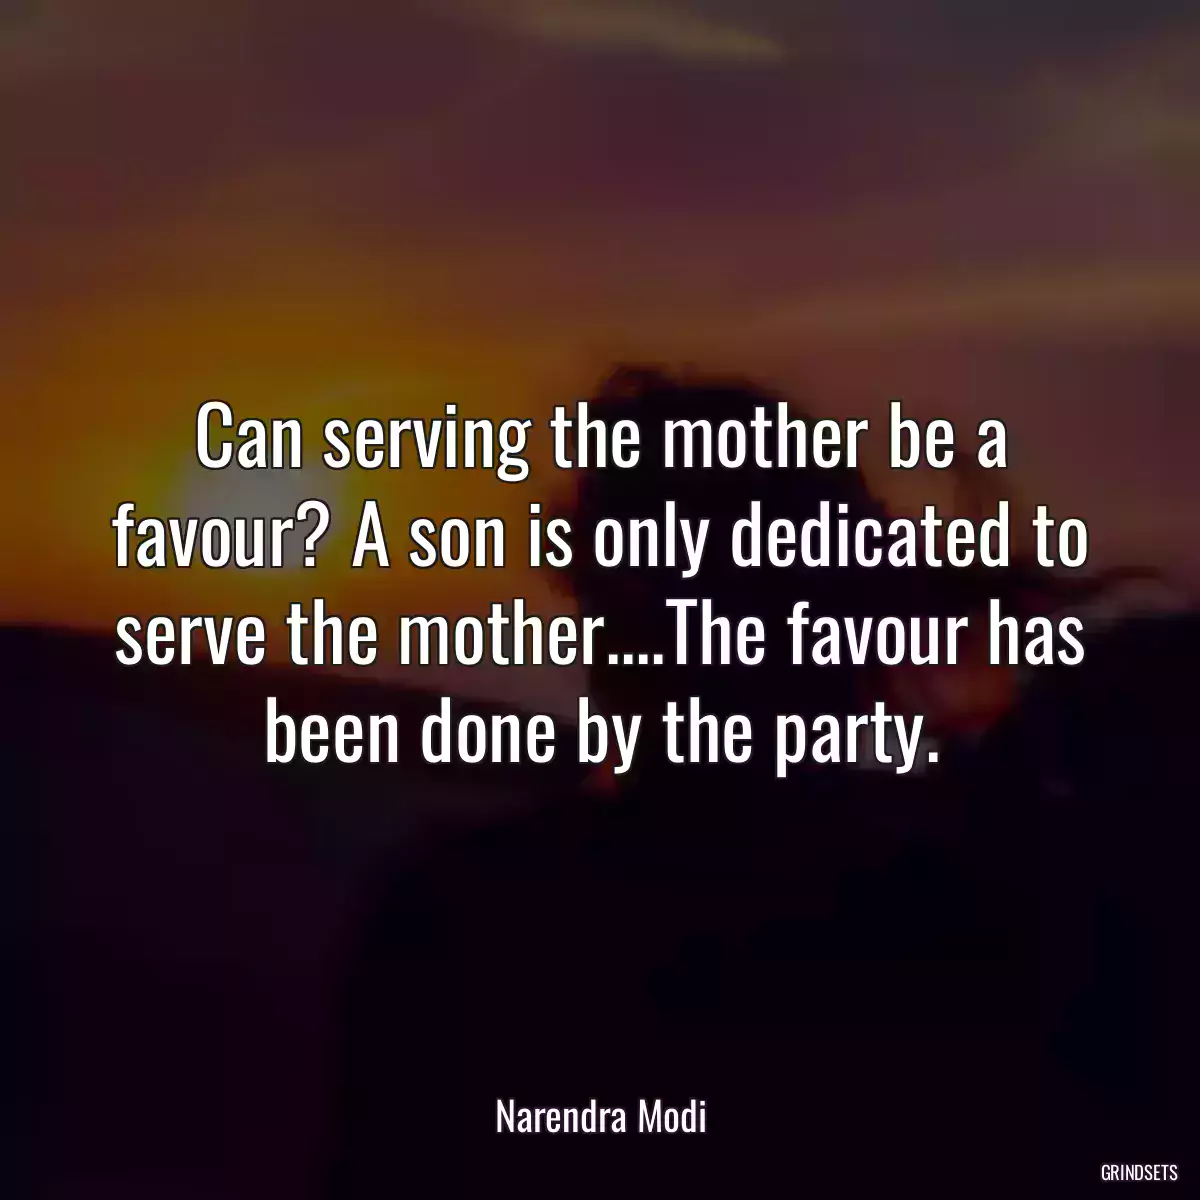 Can serving the mother be a favour? A son is only dedicated to serve the mother....The favour has been done by the party.